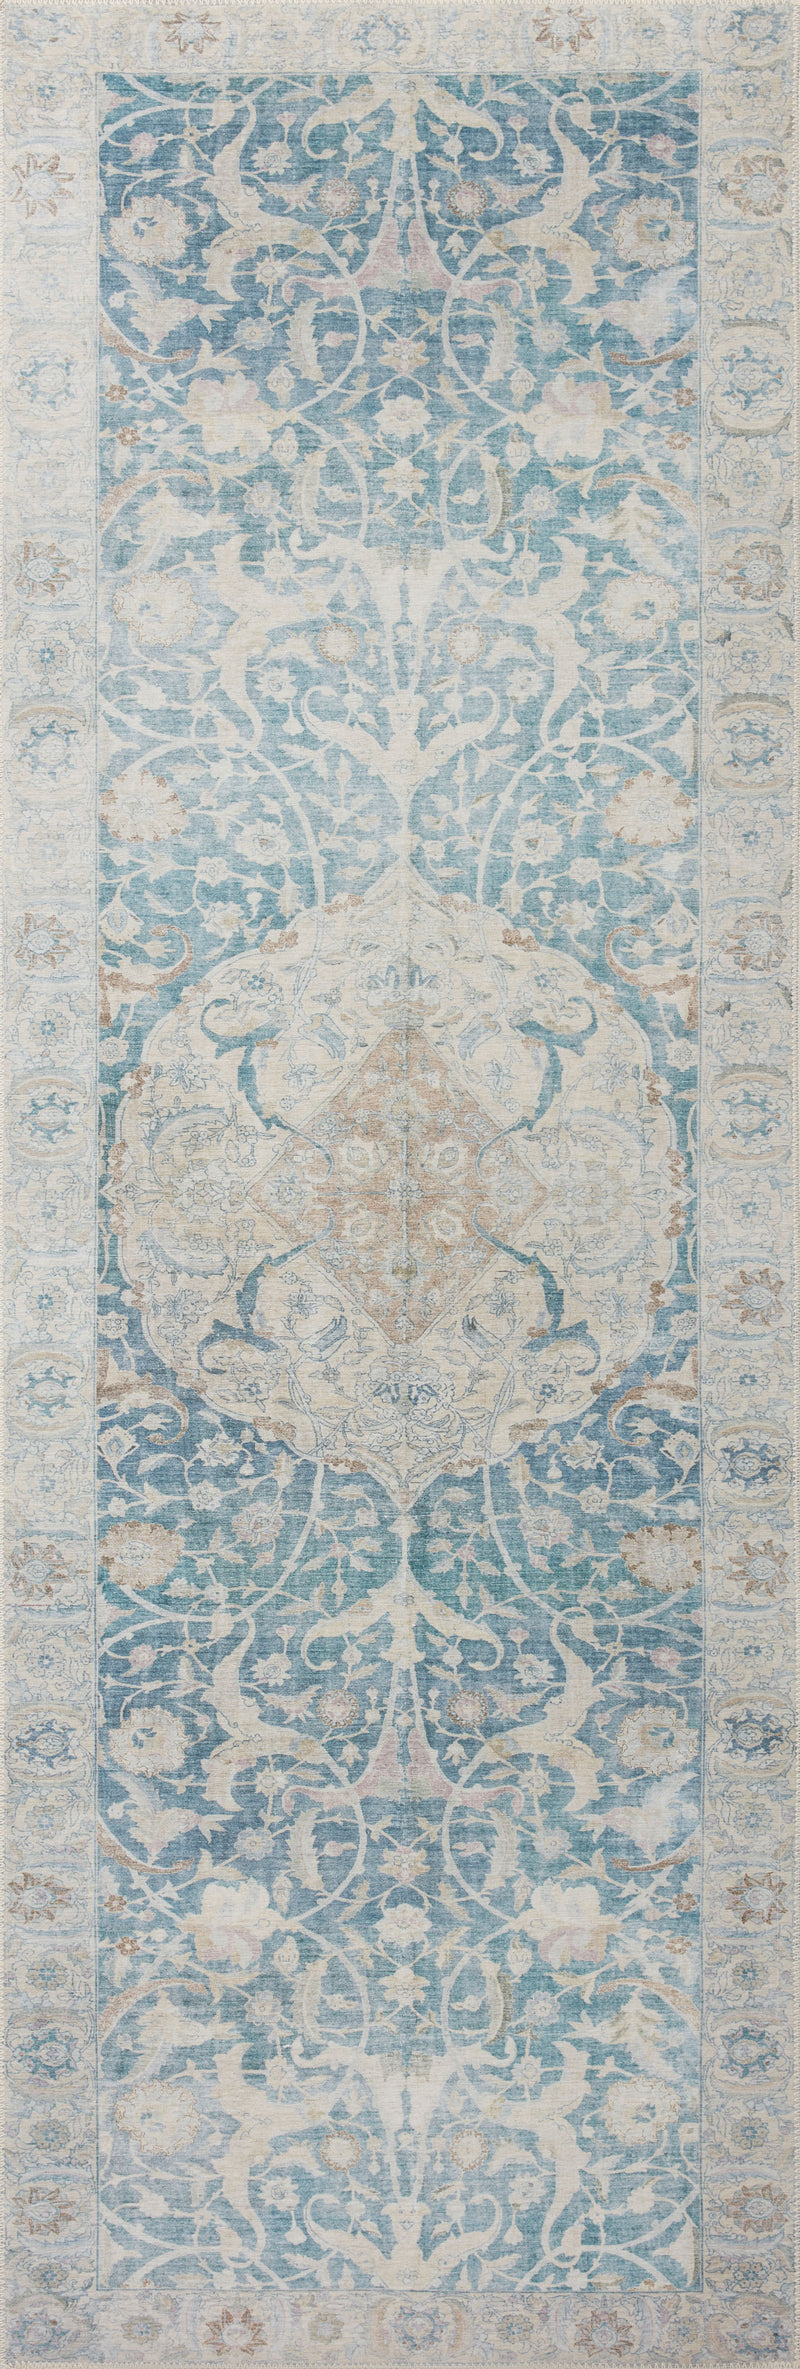 JULES Collection Rug  in  ANTIQUE / SKY Beige Accent Power-Loomed Polyester